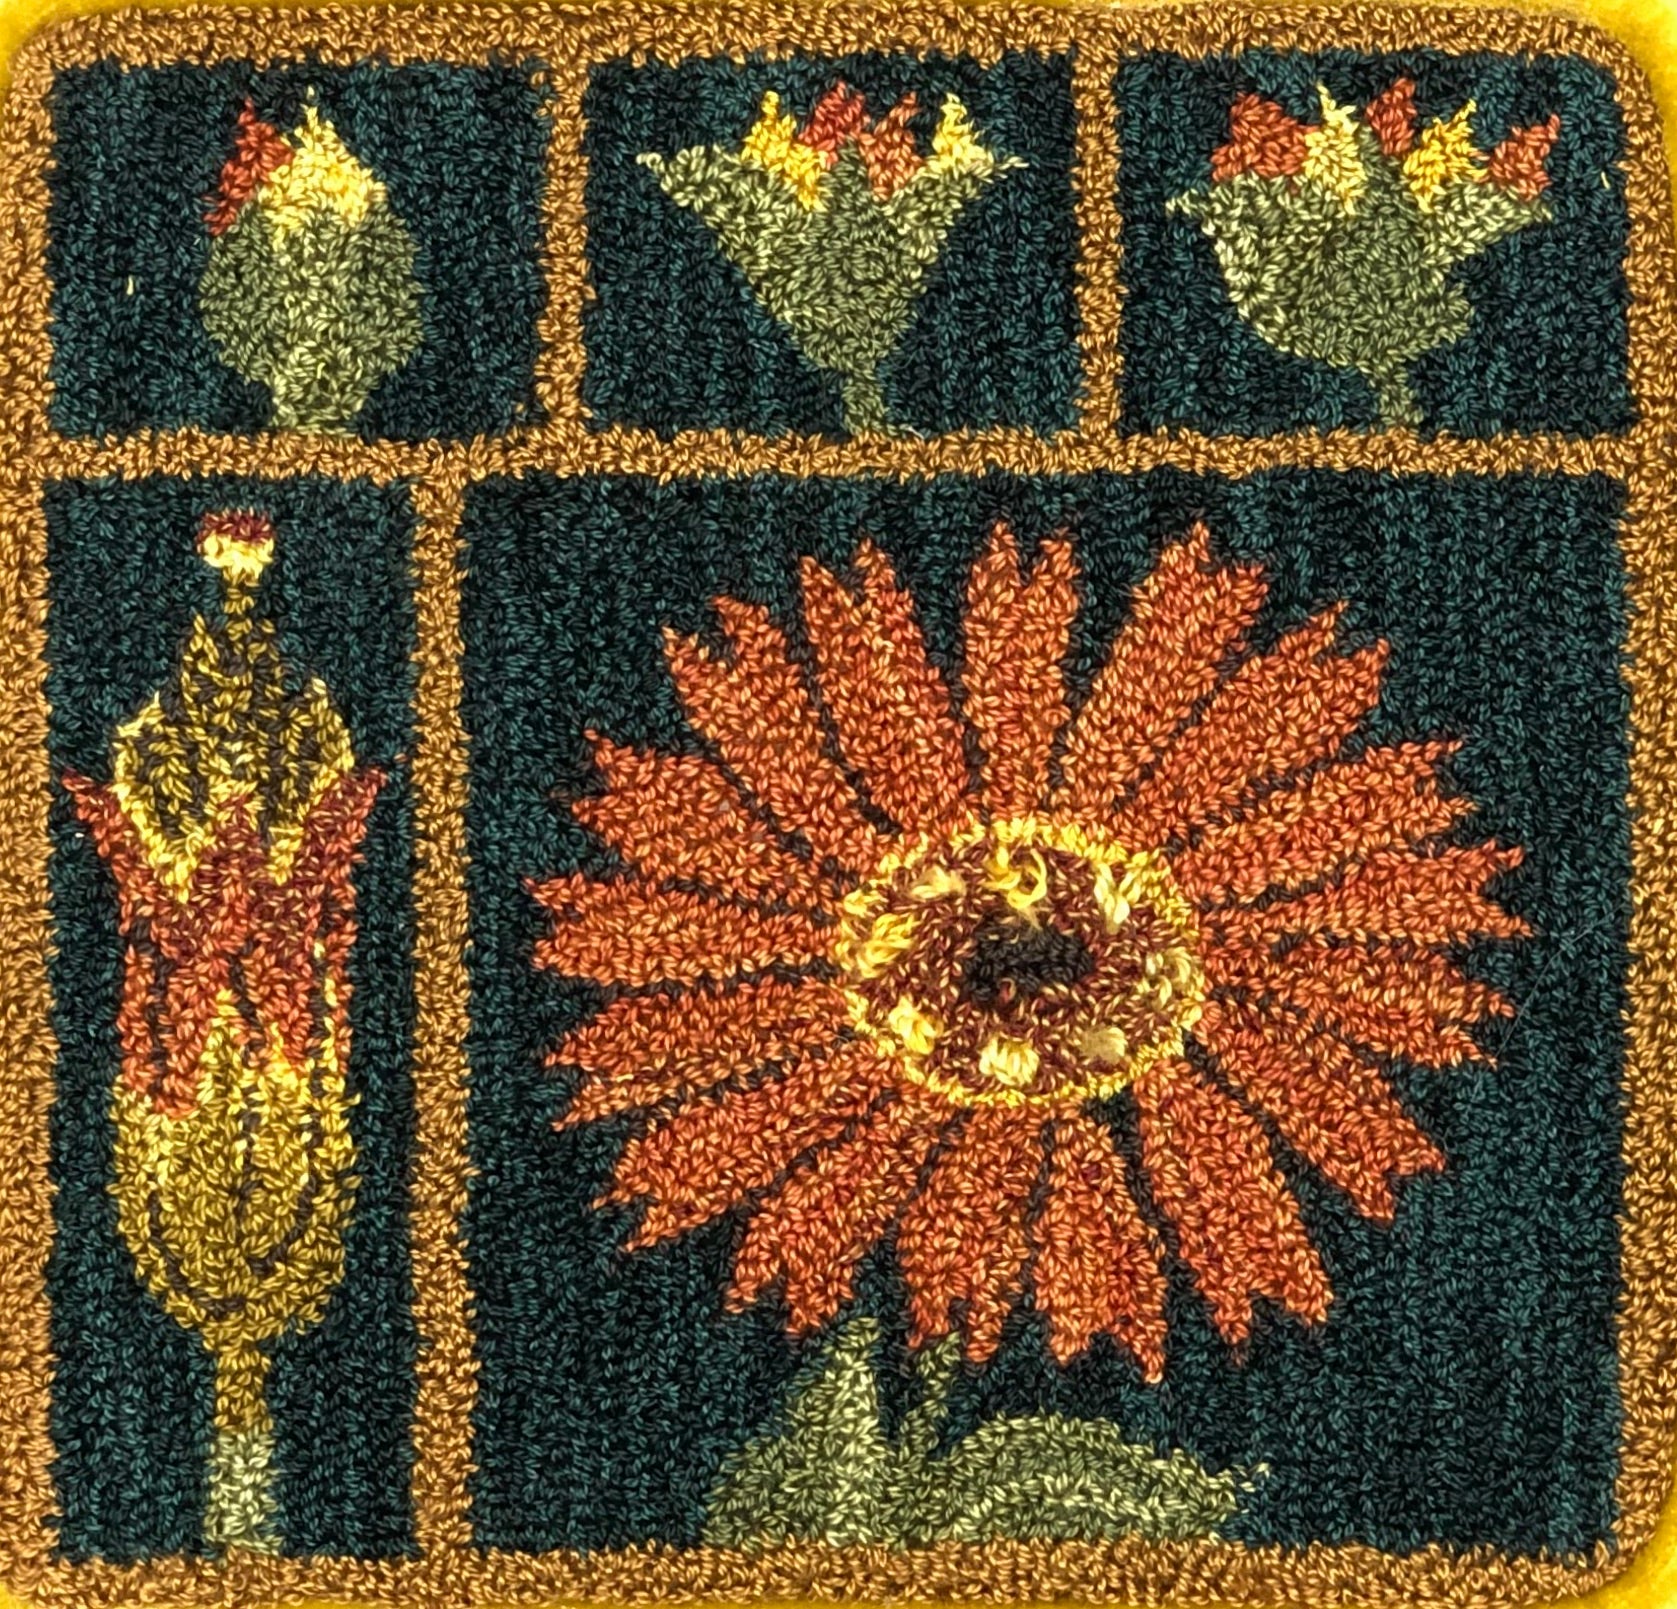 Marigold pattern is a rug hooking rug punch needle pattern, by Orphaned Wool that is hand-drawn on linen. This botanical pattern make a wonderful pillow or wall hanging design.